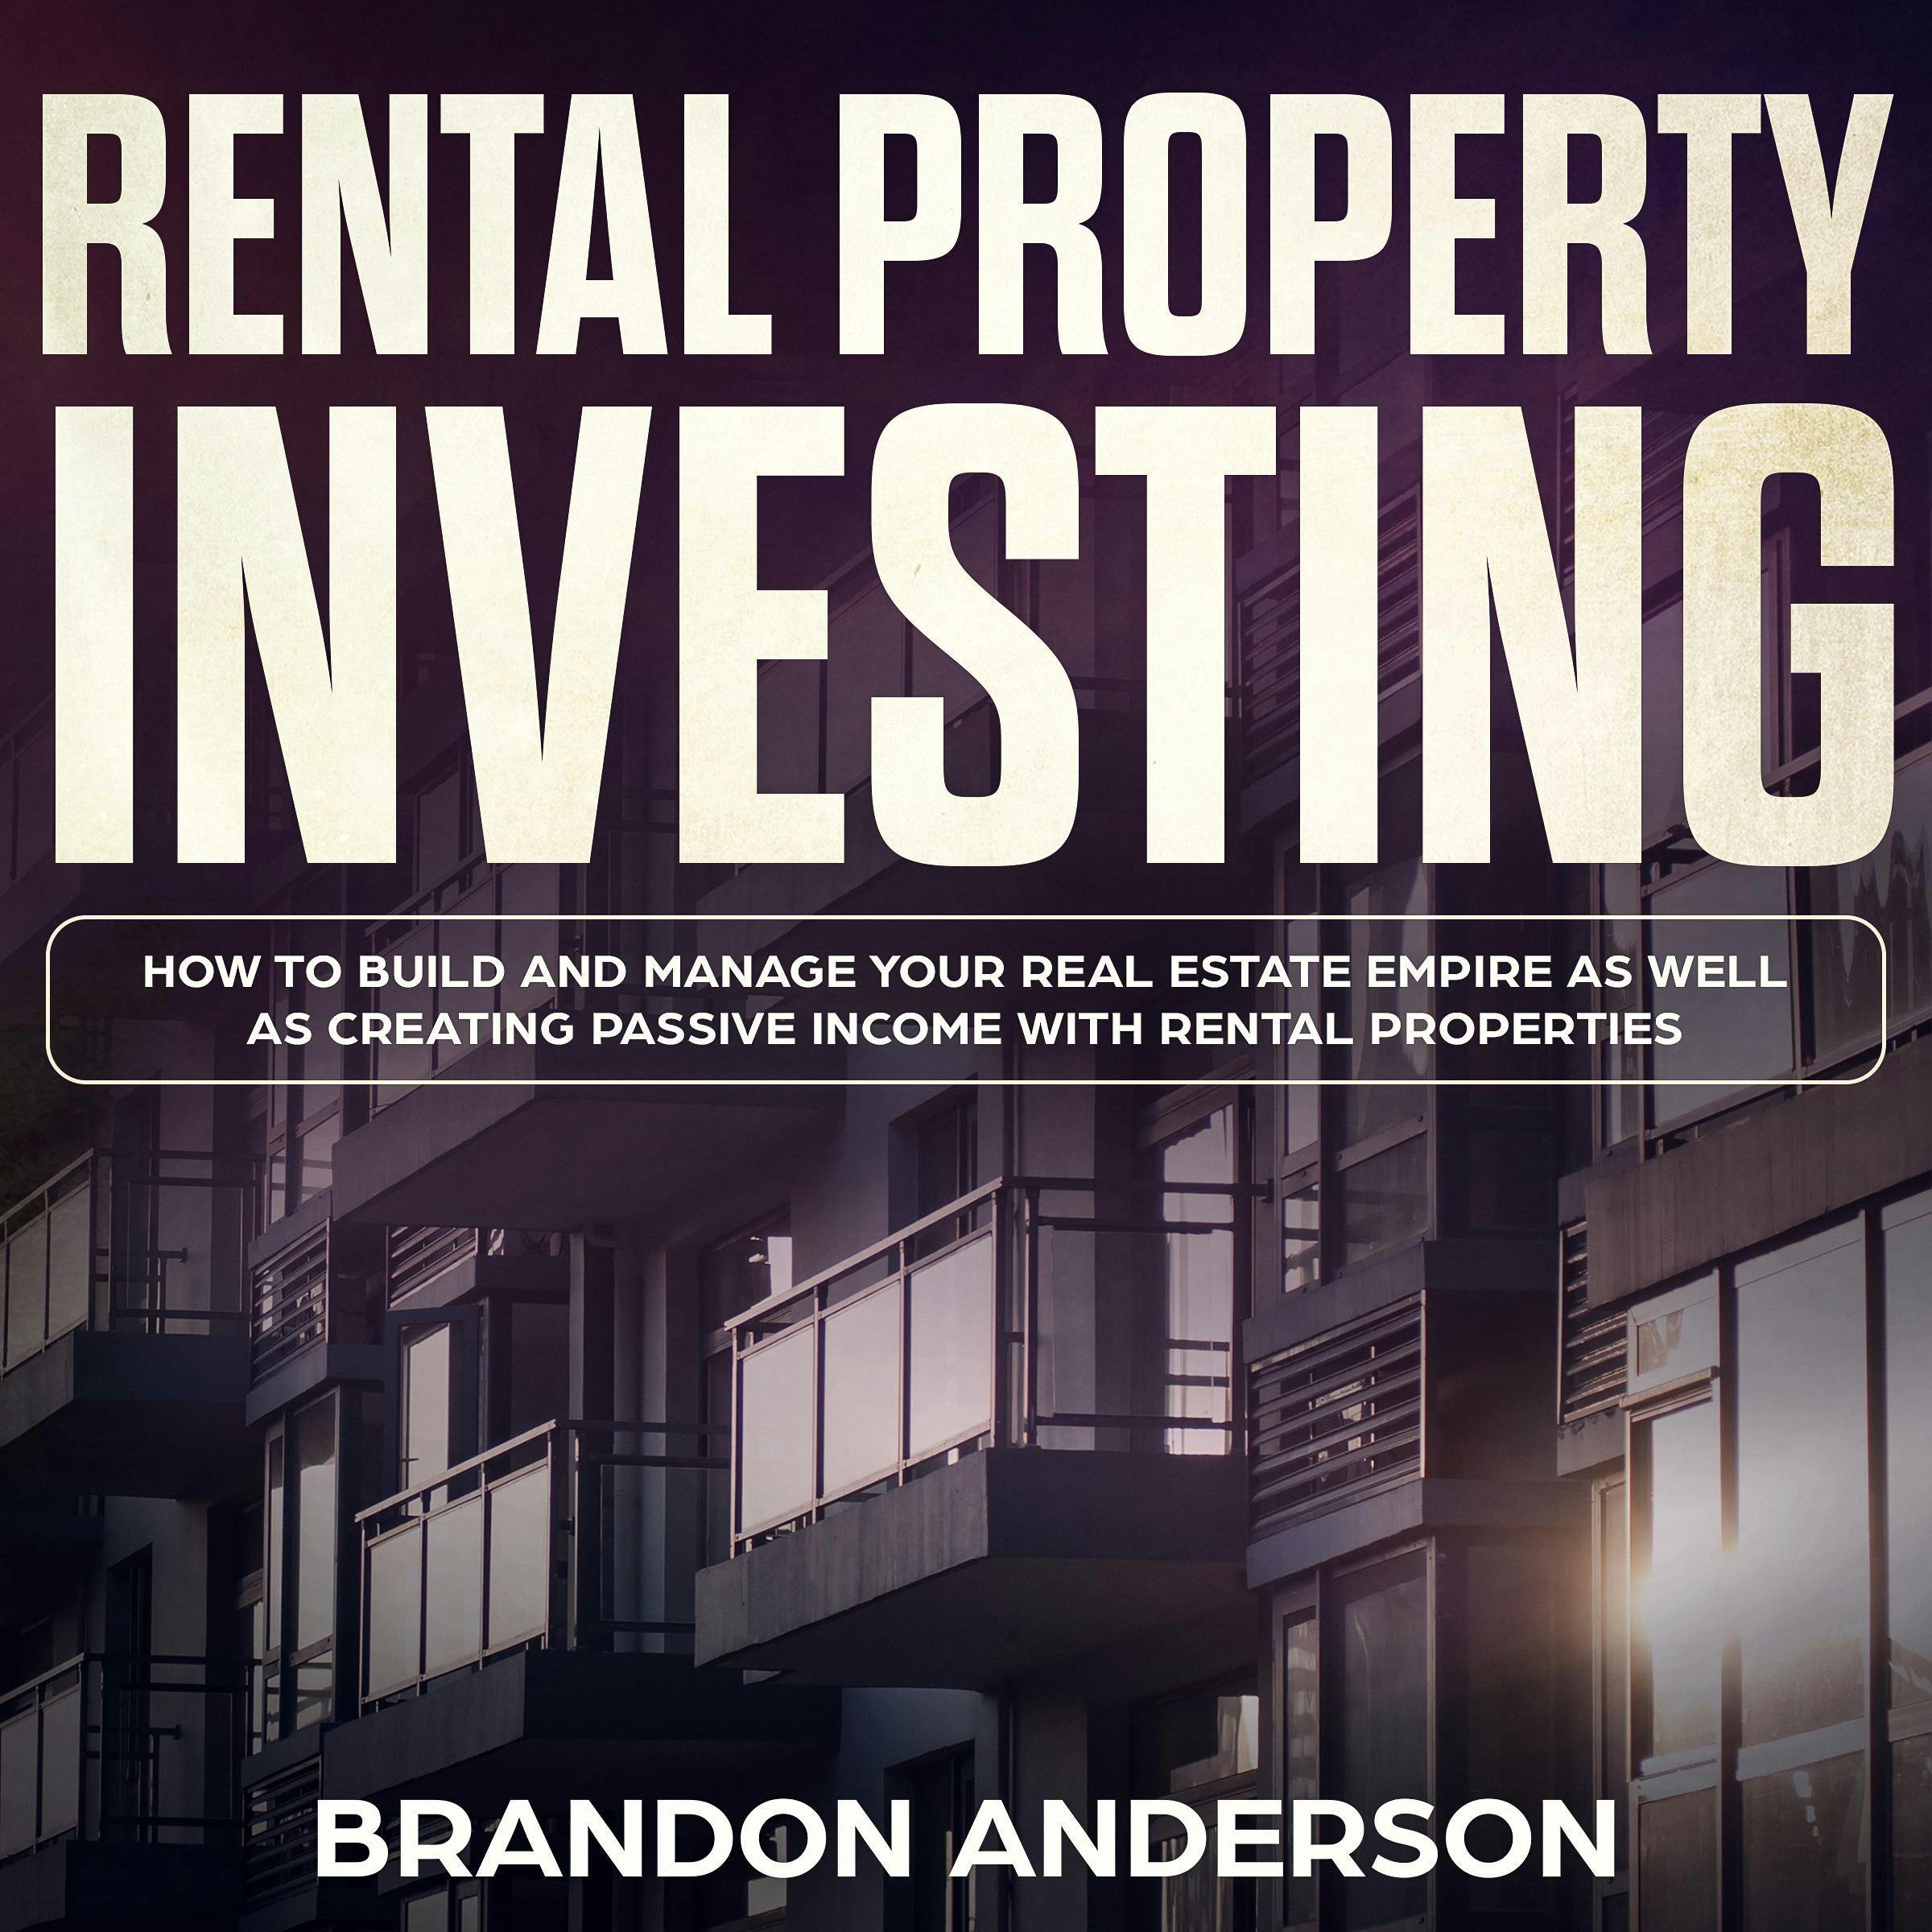 Rental Property Investing: How to Build and Manage Your Real Estate Empire as well as Creating Passive Income with Rental Properties - Brandon Anderson